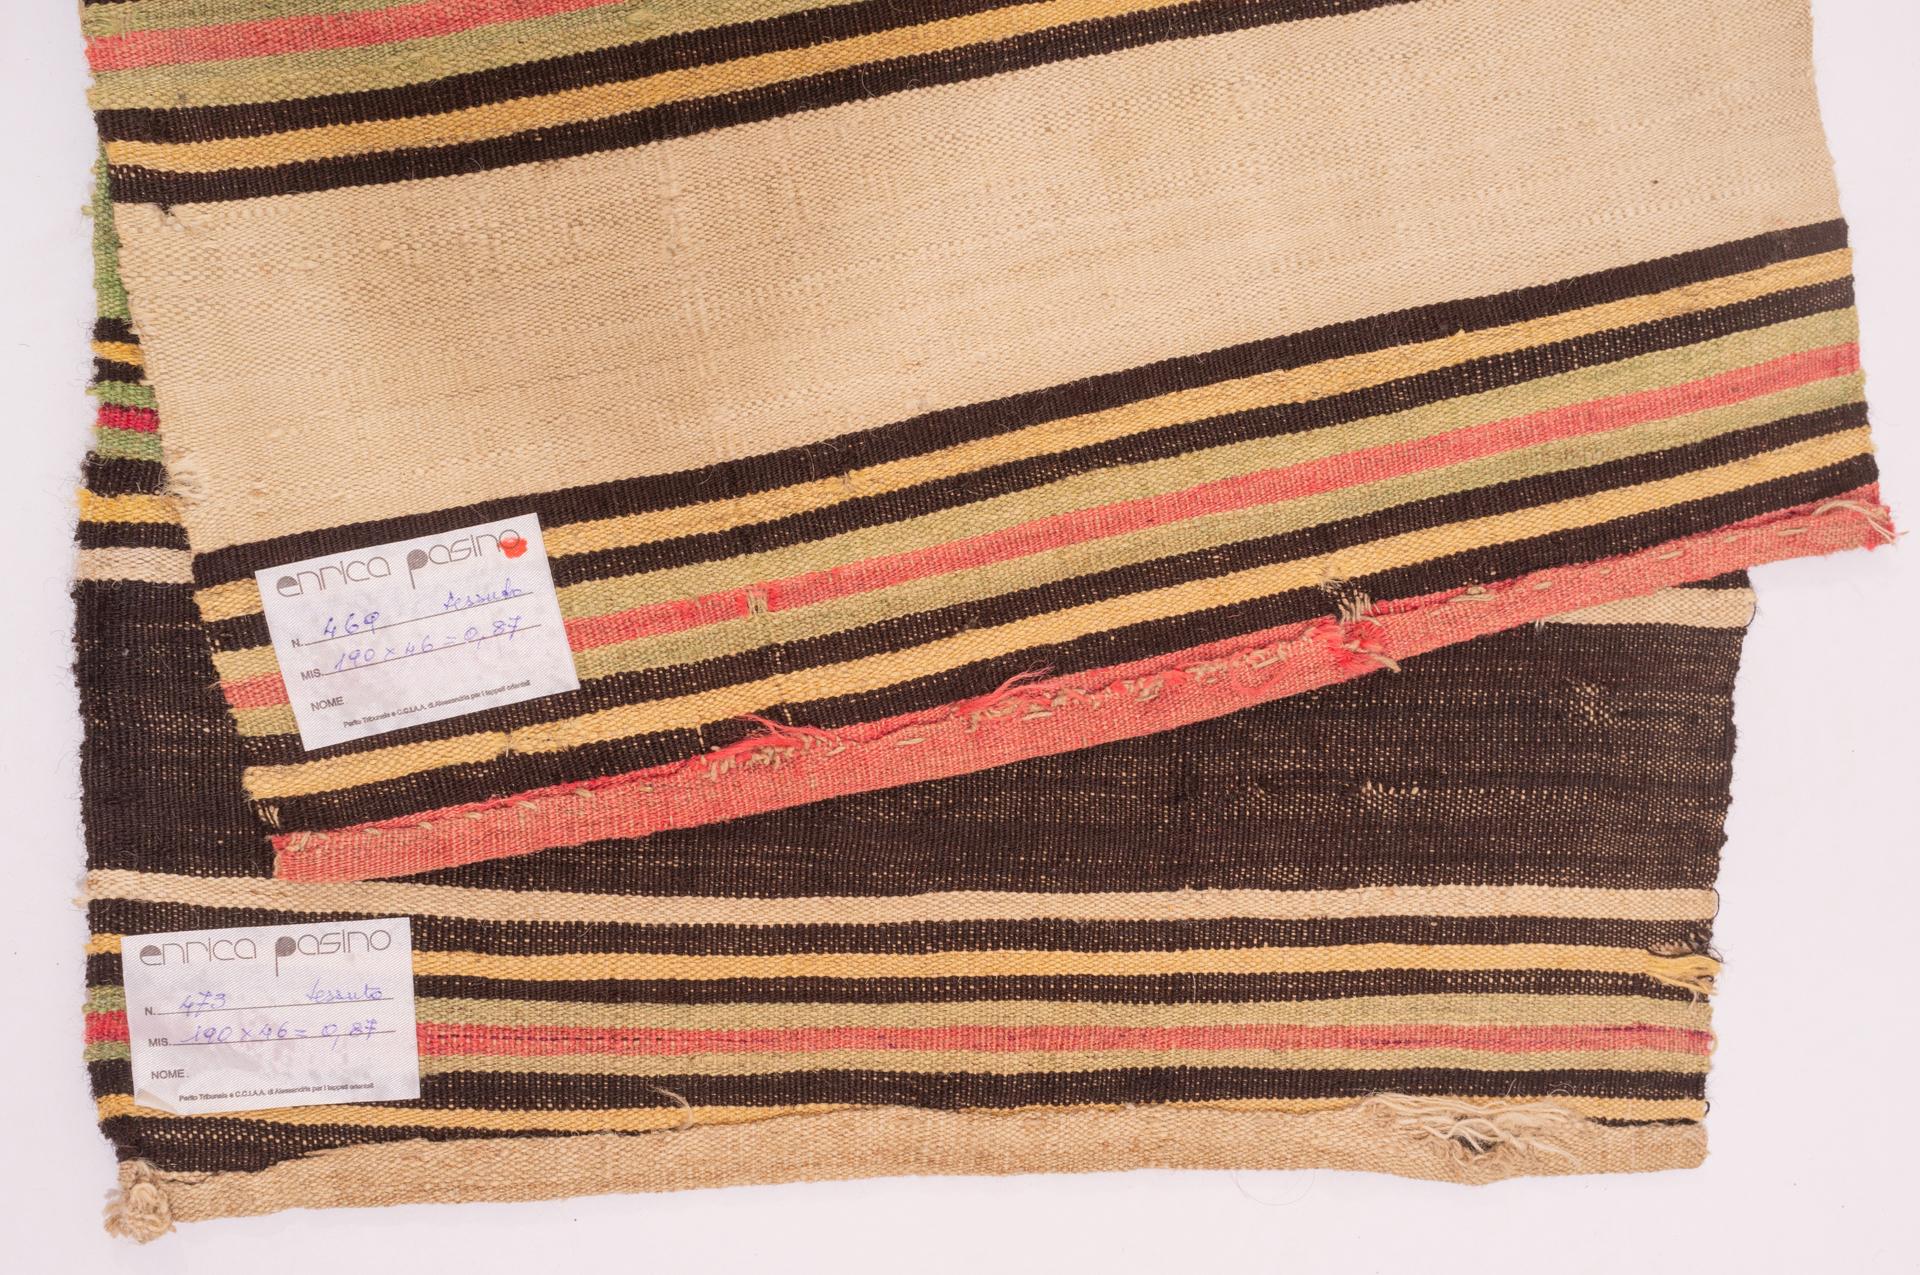 nr. 469 and 473 -  Pair of old oriental kilim stripes.  They can be joined together (on request) or used as covering for benches and cushions.  There are some small holes, easily maskable, but they are antique!
The price, moreover, is really good.